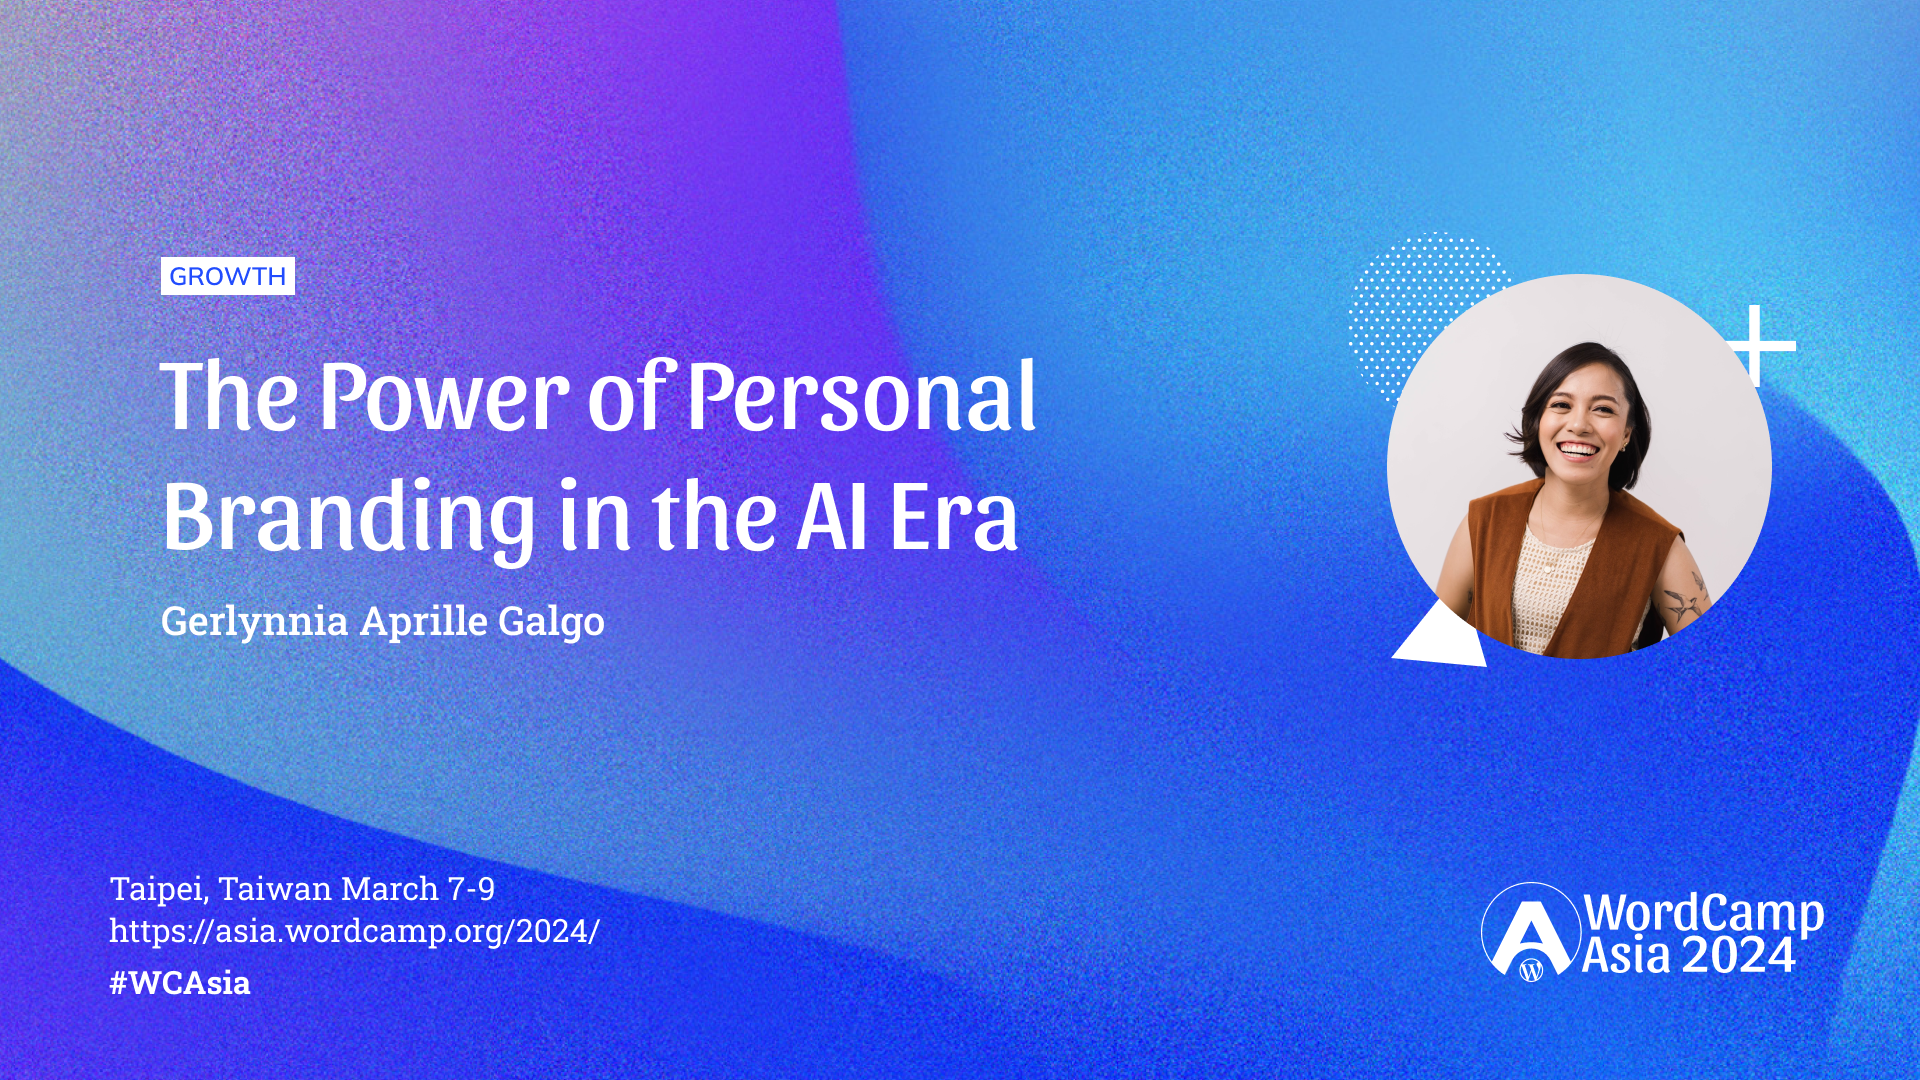 The Power of Personal Branding in the AI Era